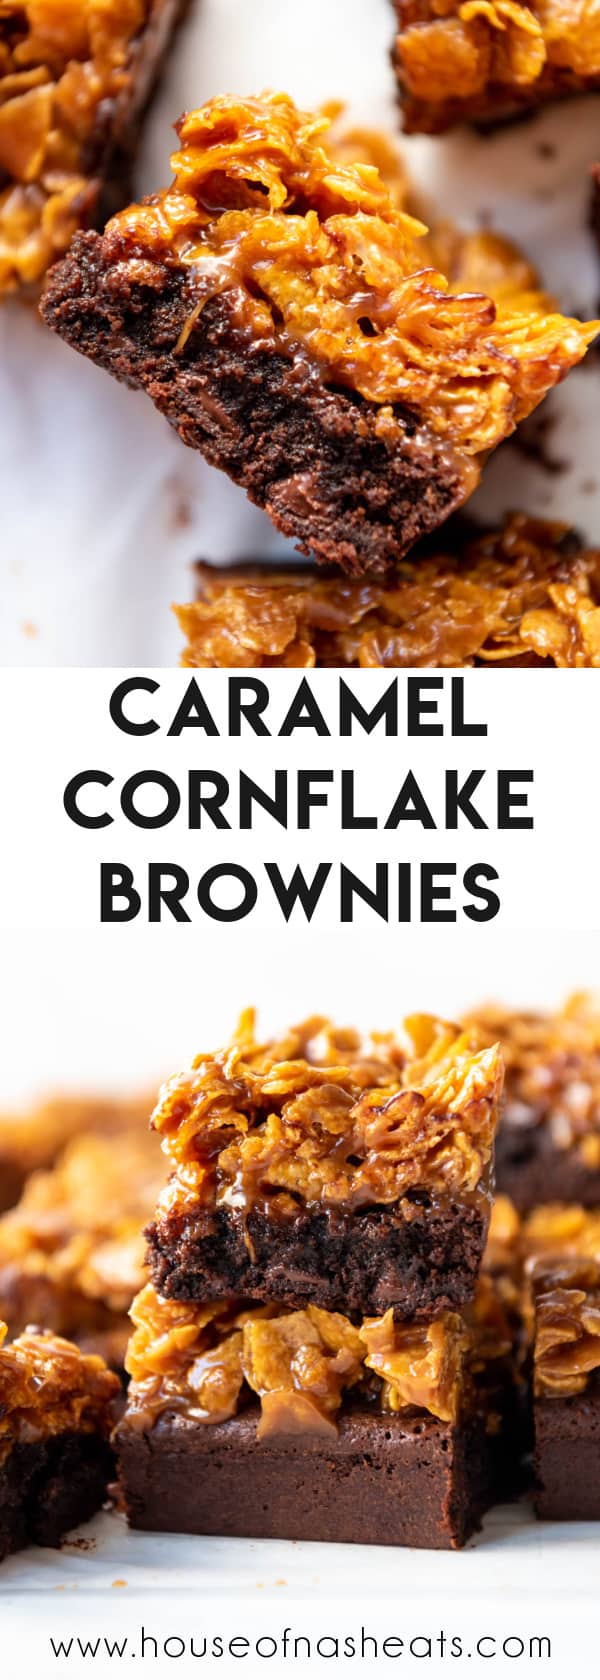 A collage of images of caramel cornflake brownies with text overlay.